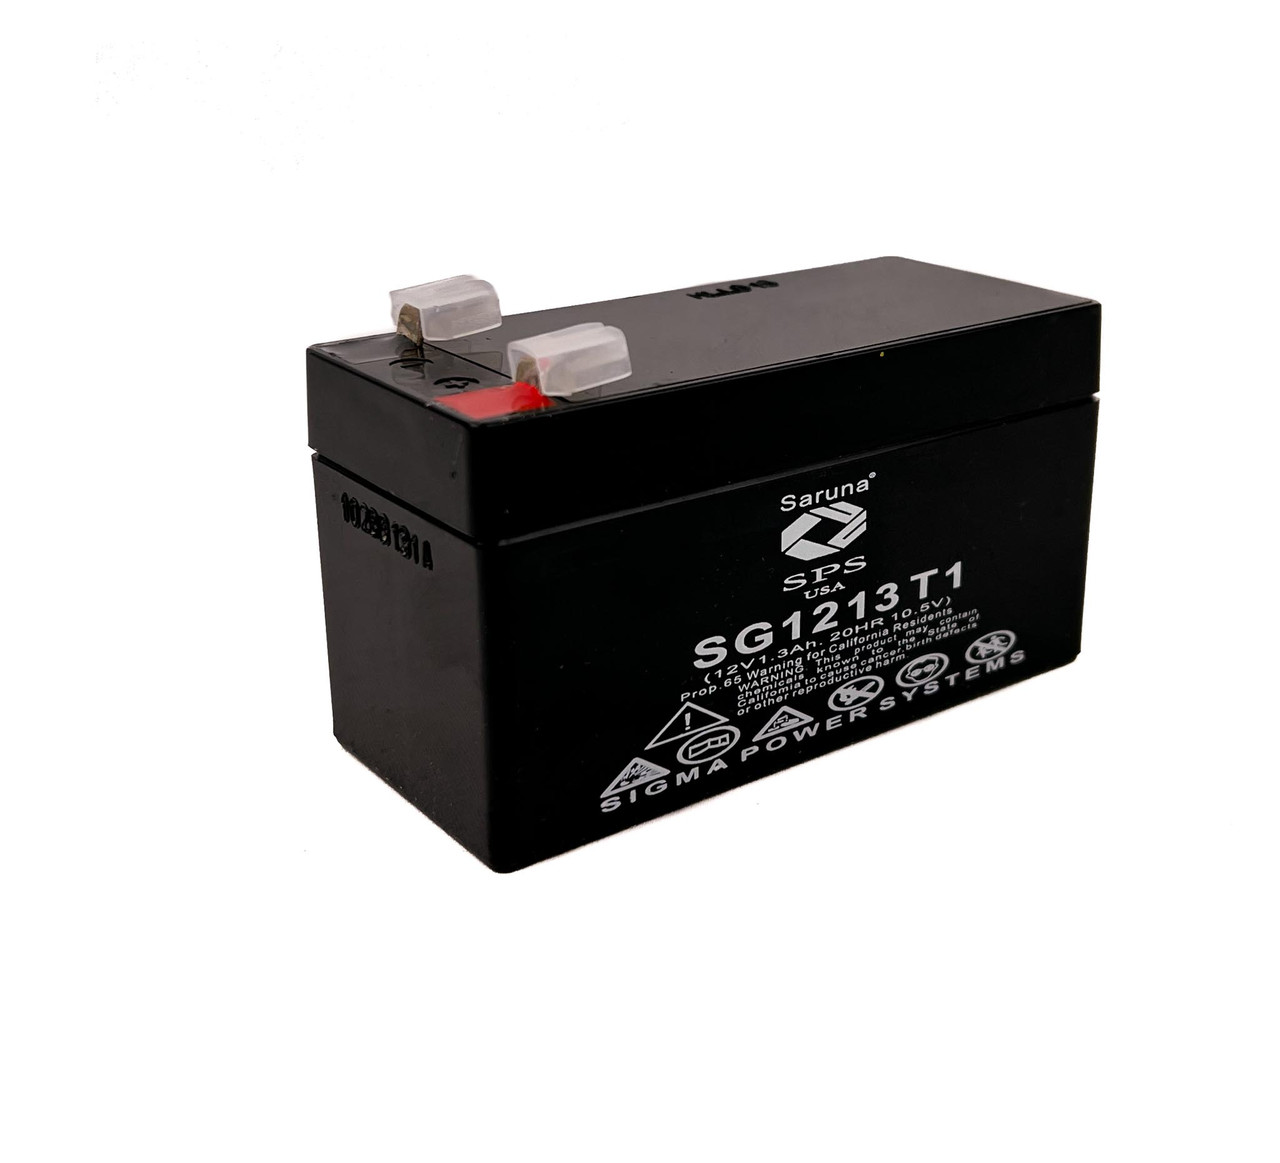 Raion Power 12V 1.3Ah Non-Spillable Replacement Rechargebale Battery for Park Medical Electronics Lab 809 Doppler